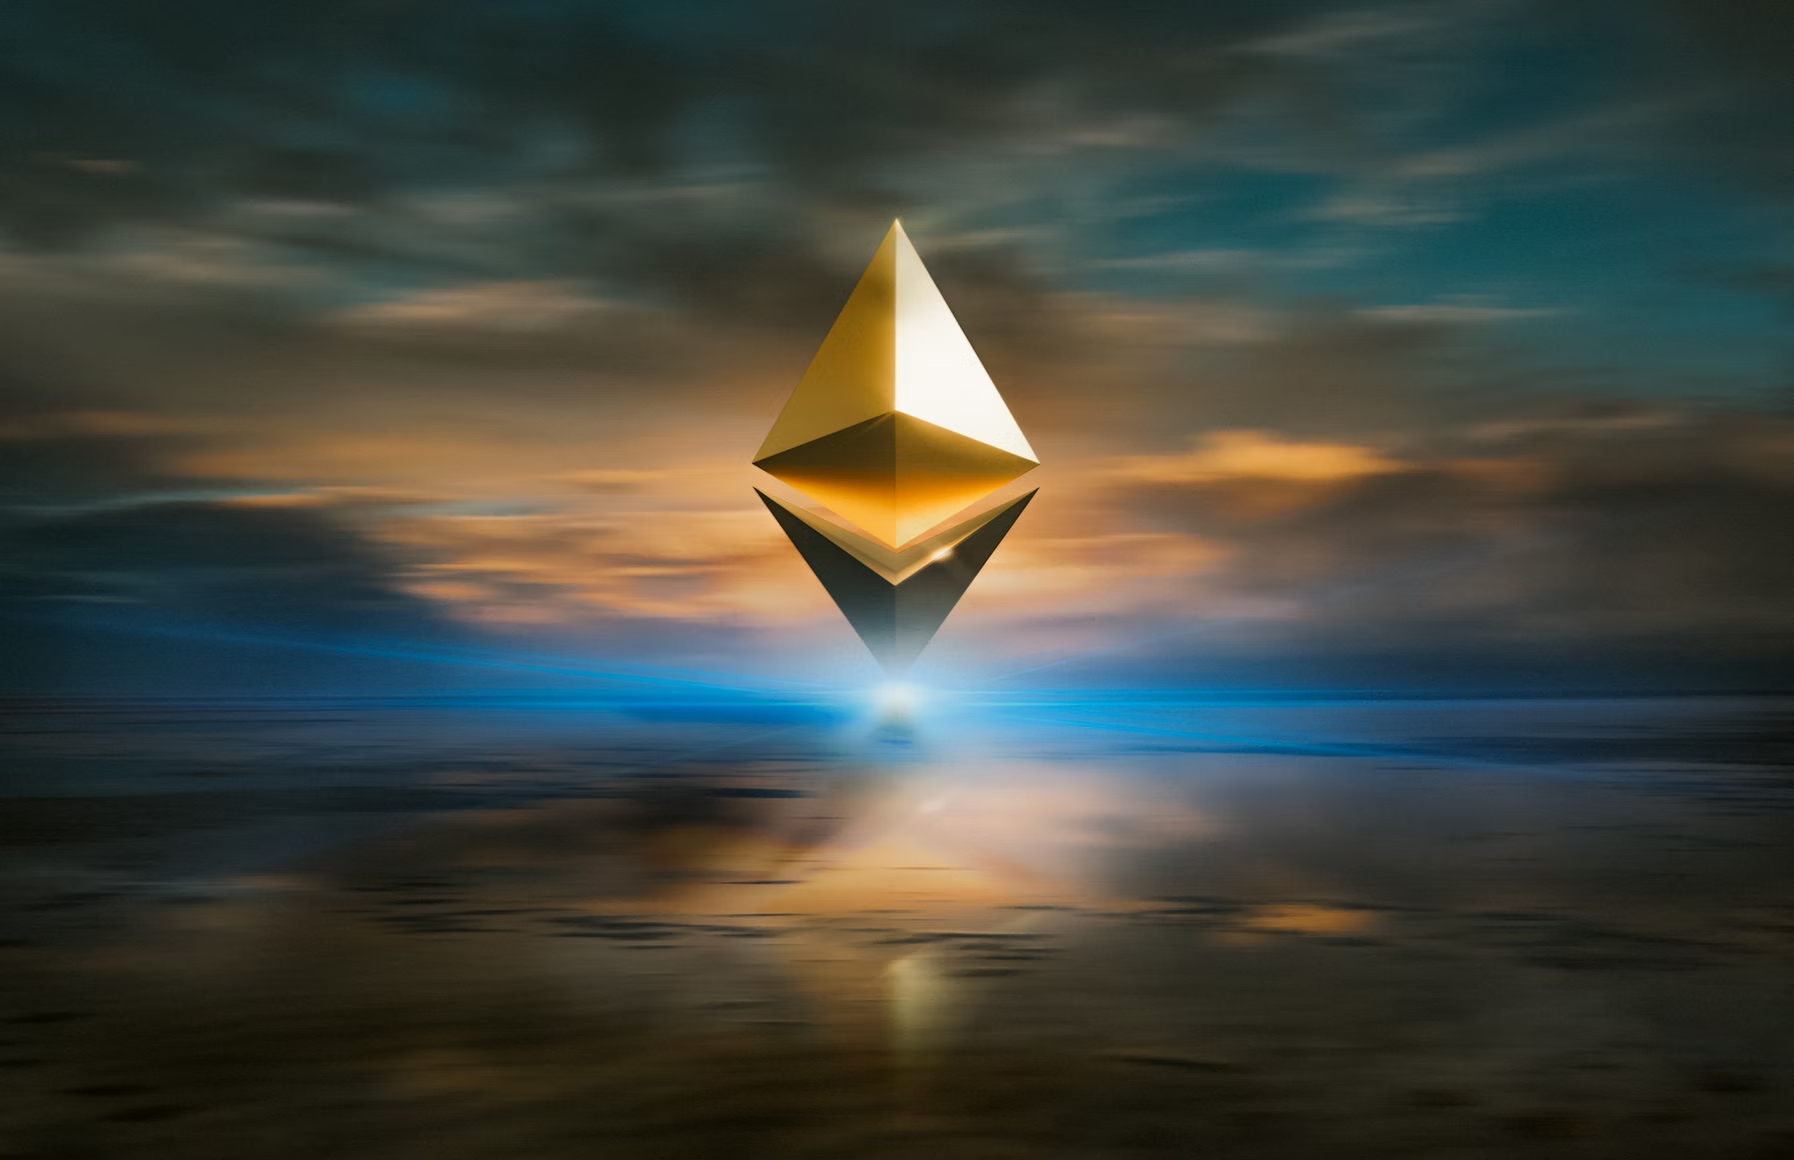 An image of the Ethereum logo.